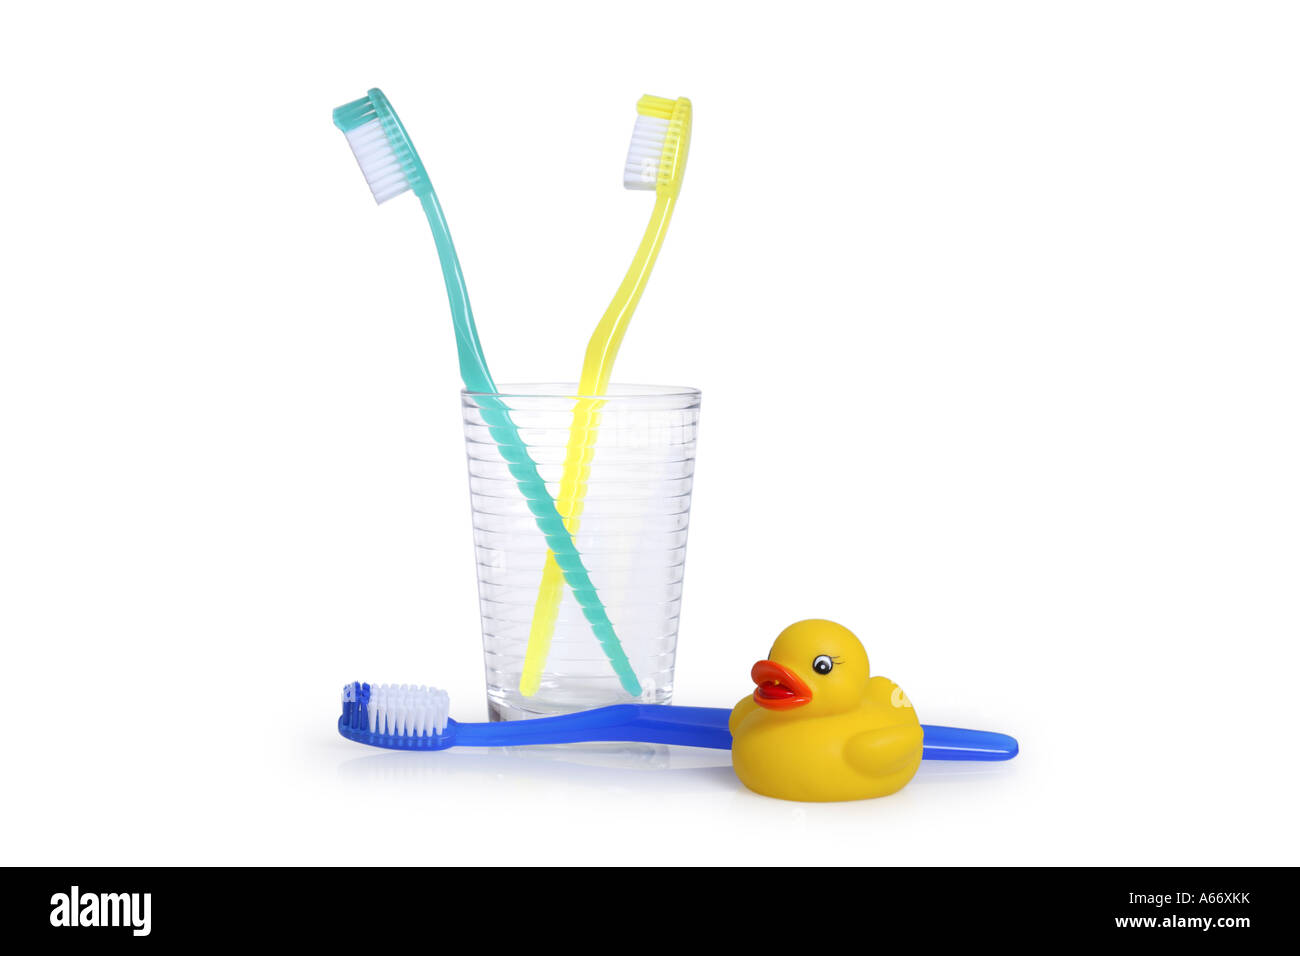 Toothbrushes cut out on white background Stock Photo